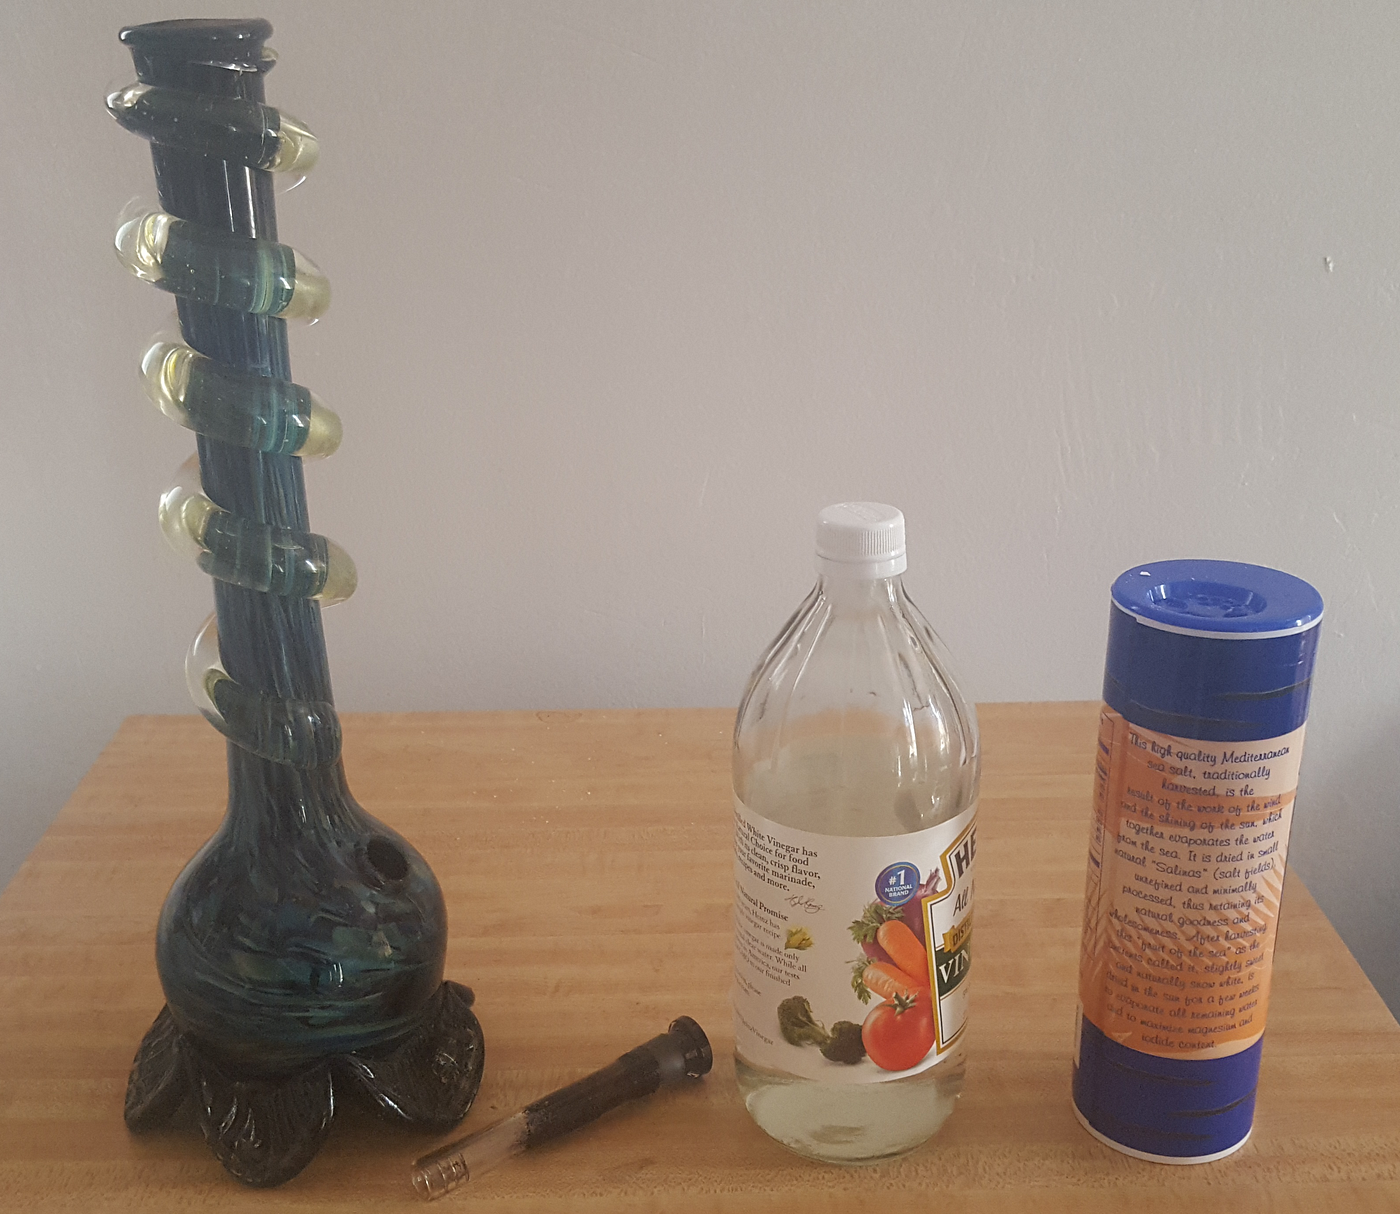 How to Clean Glass Bongs and Pipes | by Search Weedguide | Medium